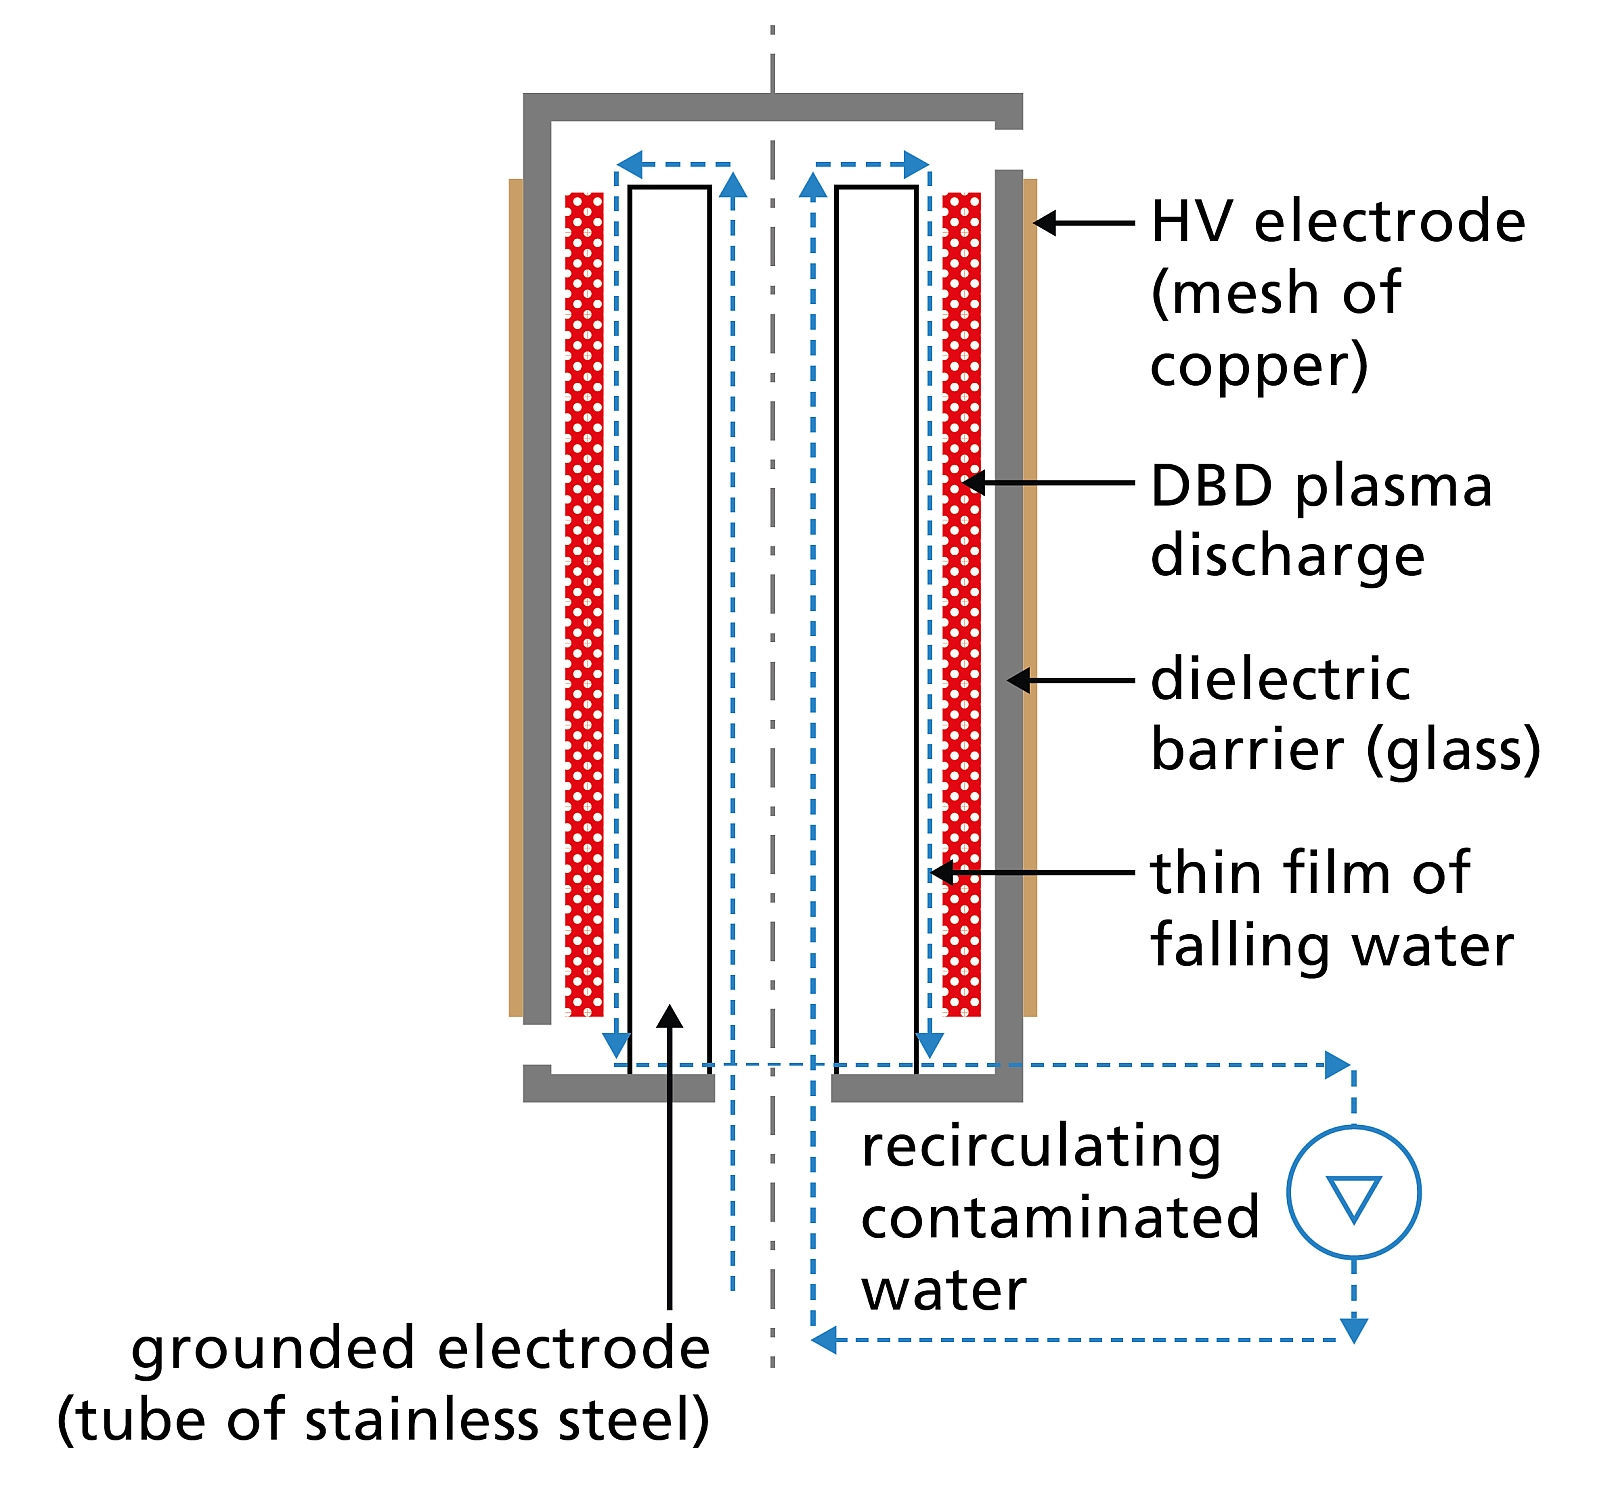 Plasma reactor: Plasma is created by applying voltage to the copper electrode. Contaminated water is pumped upwards and flows back down through a gap in the plasma discharge zone, attacking the PFAS in the process.